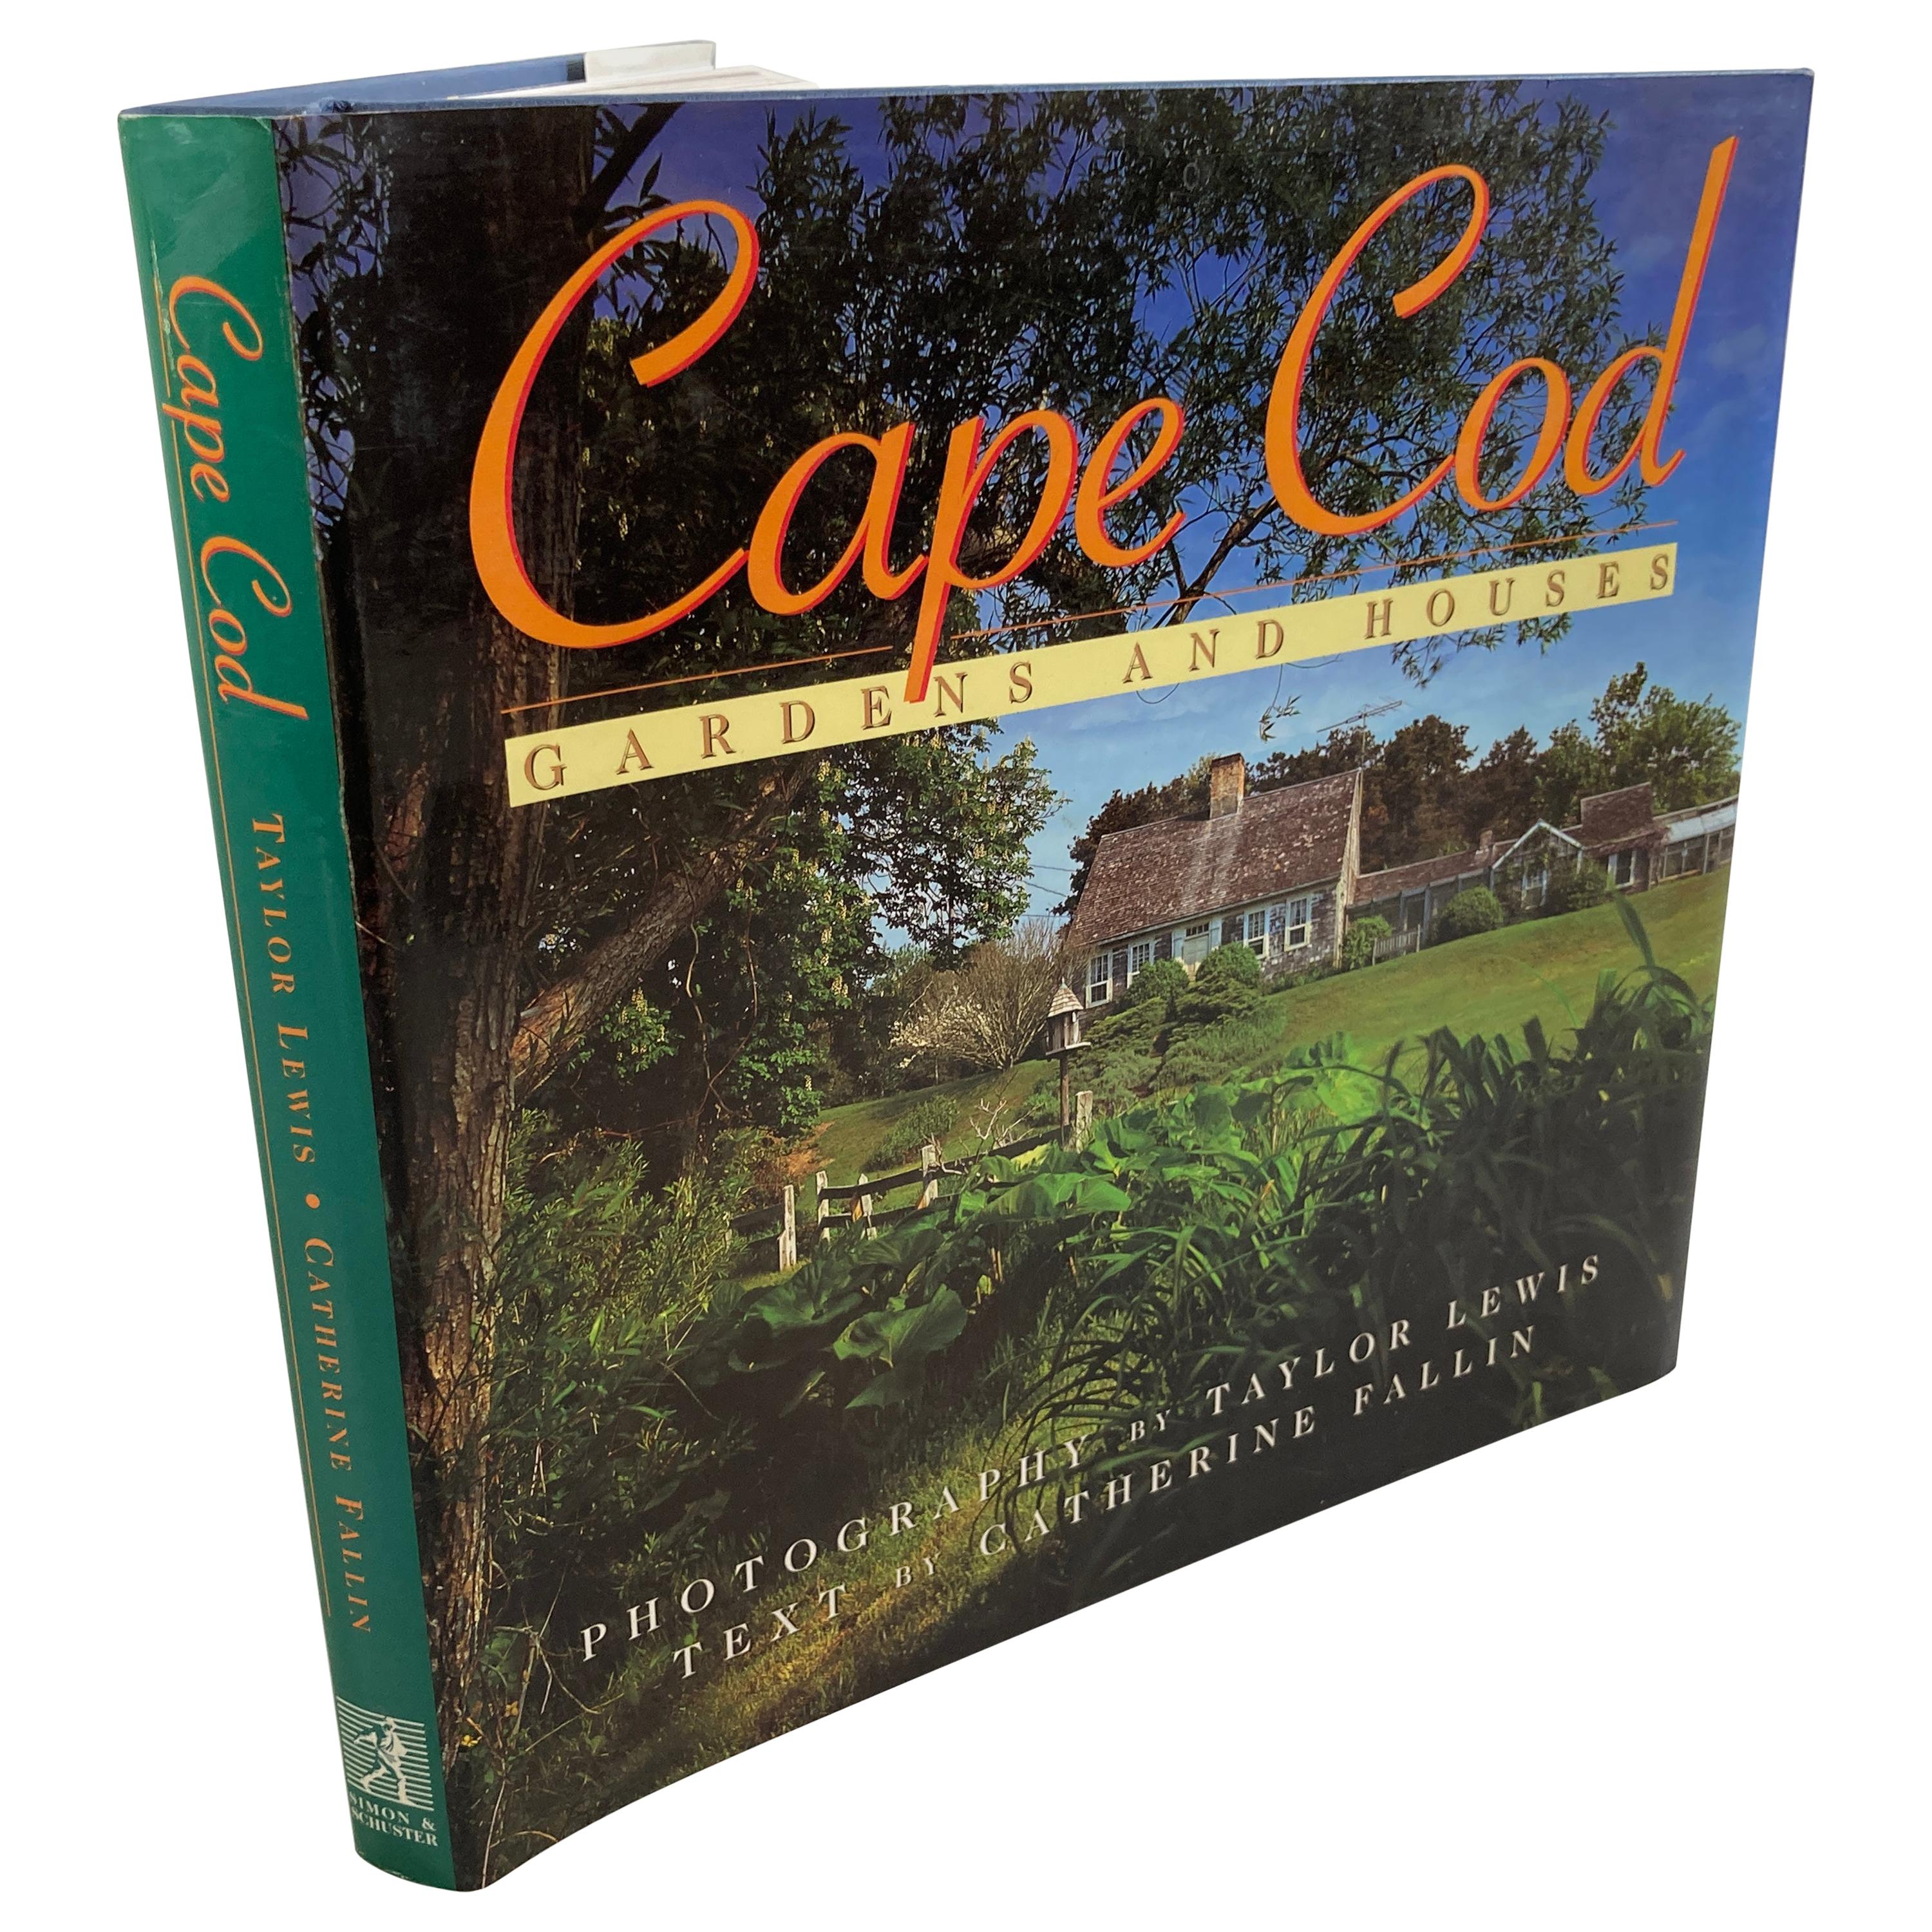 Cape Cod Gardens and Houses by Catherine Fallin Taylor Lewis Hardcover Book